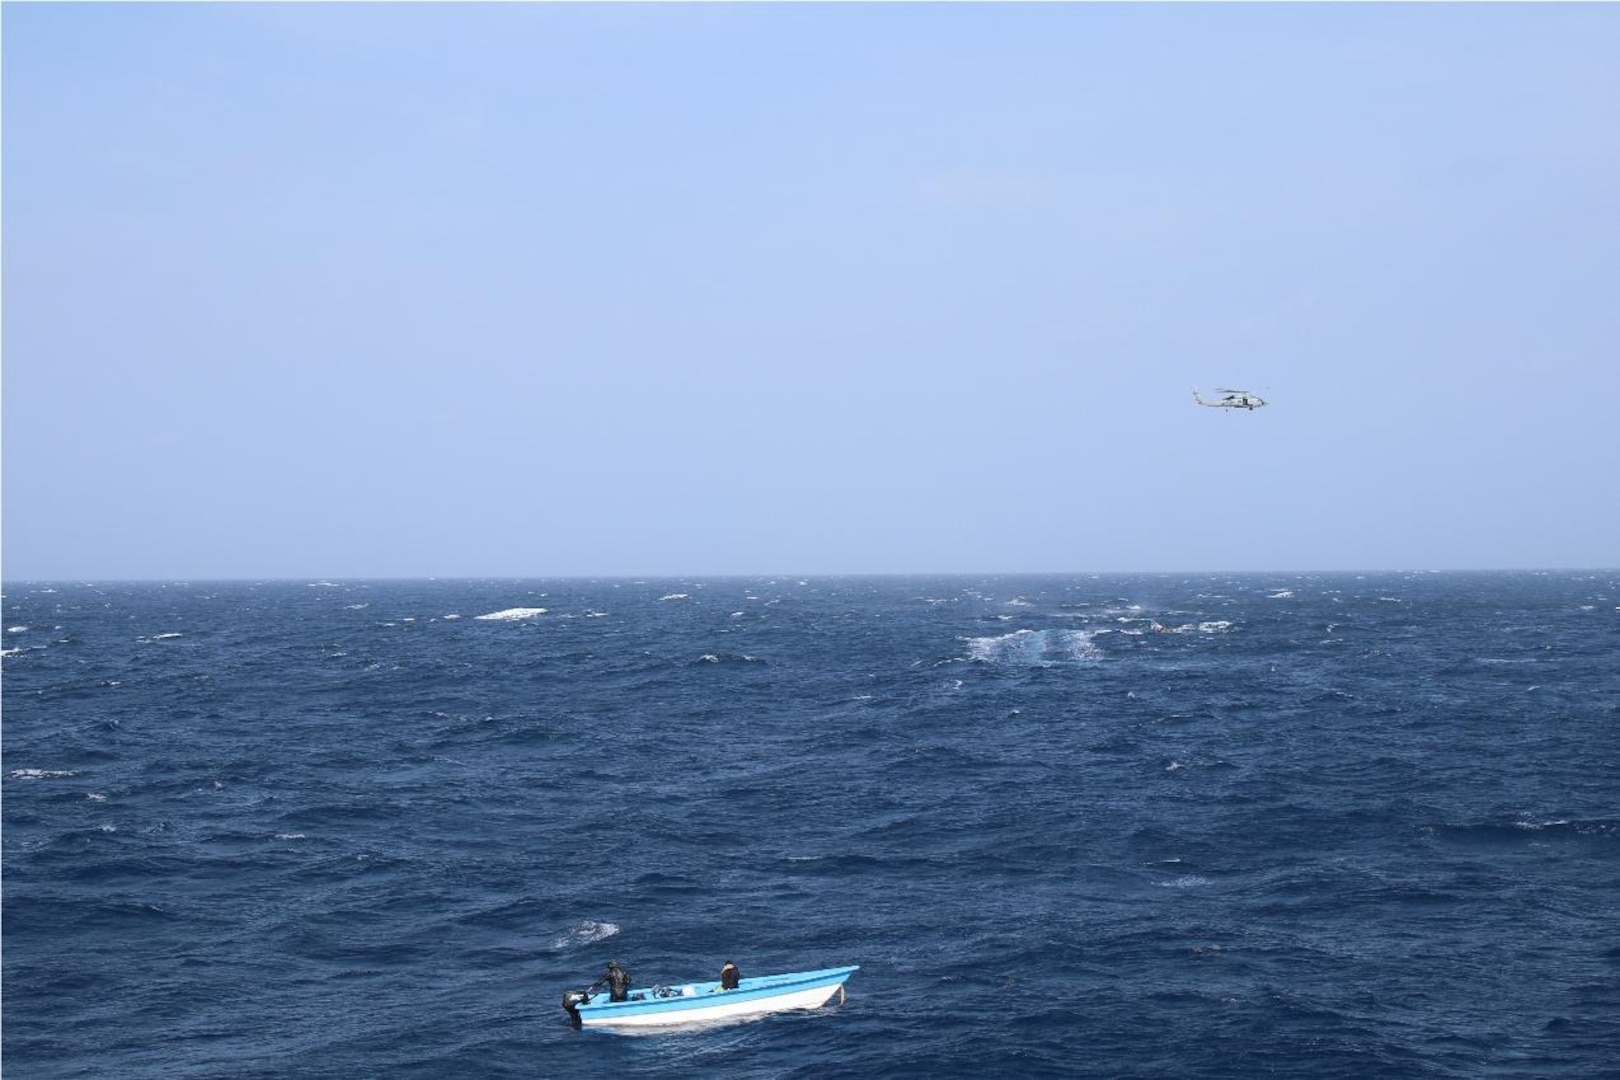 USS Lassen with embarked U.S. Coast Guard Law Enforcement Detachment team conducts enhanced counter narcotics operations in the Caribbean Sea, May 26, 2020.